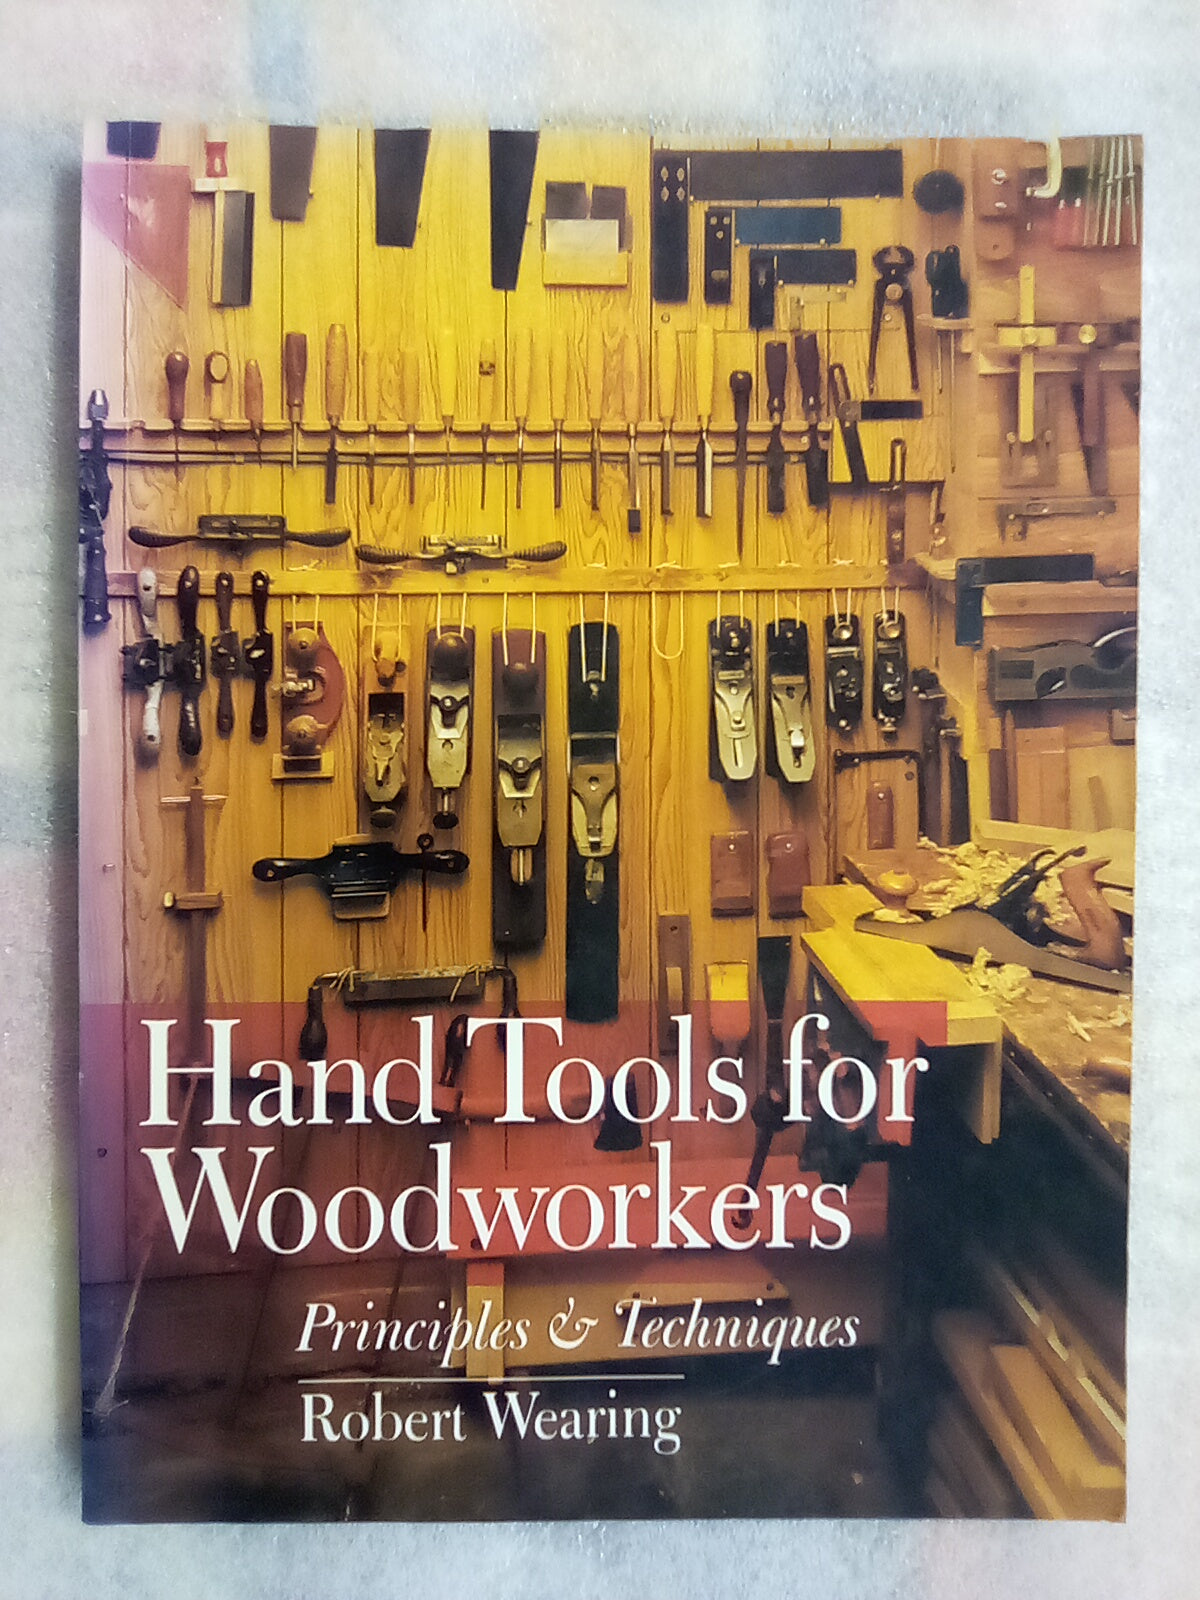 Hand Tools for Woodworkers - Principles and Techniques by Robert Wearing